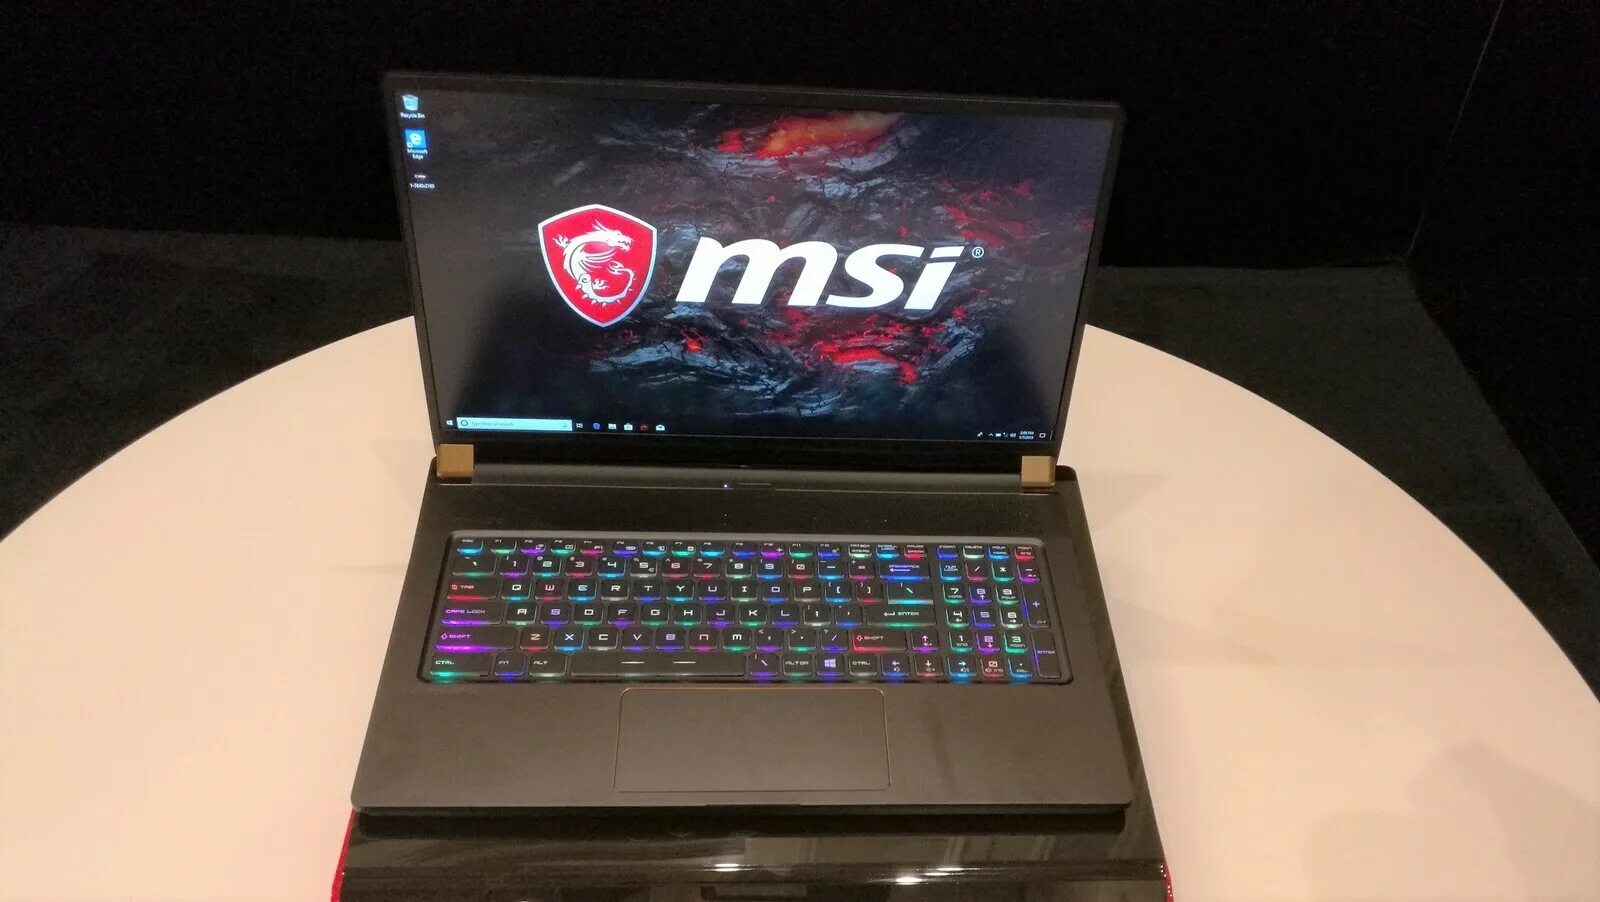 Msi stealth 17. MSI gs75. Gs75 Stealth. MSI stels gs75. Topdecл MSI gs70 Stealth.